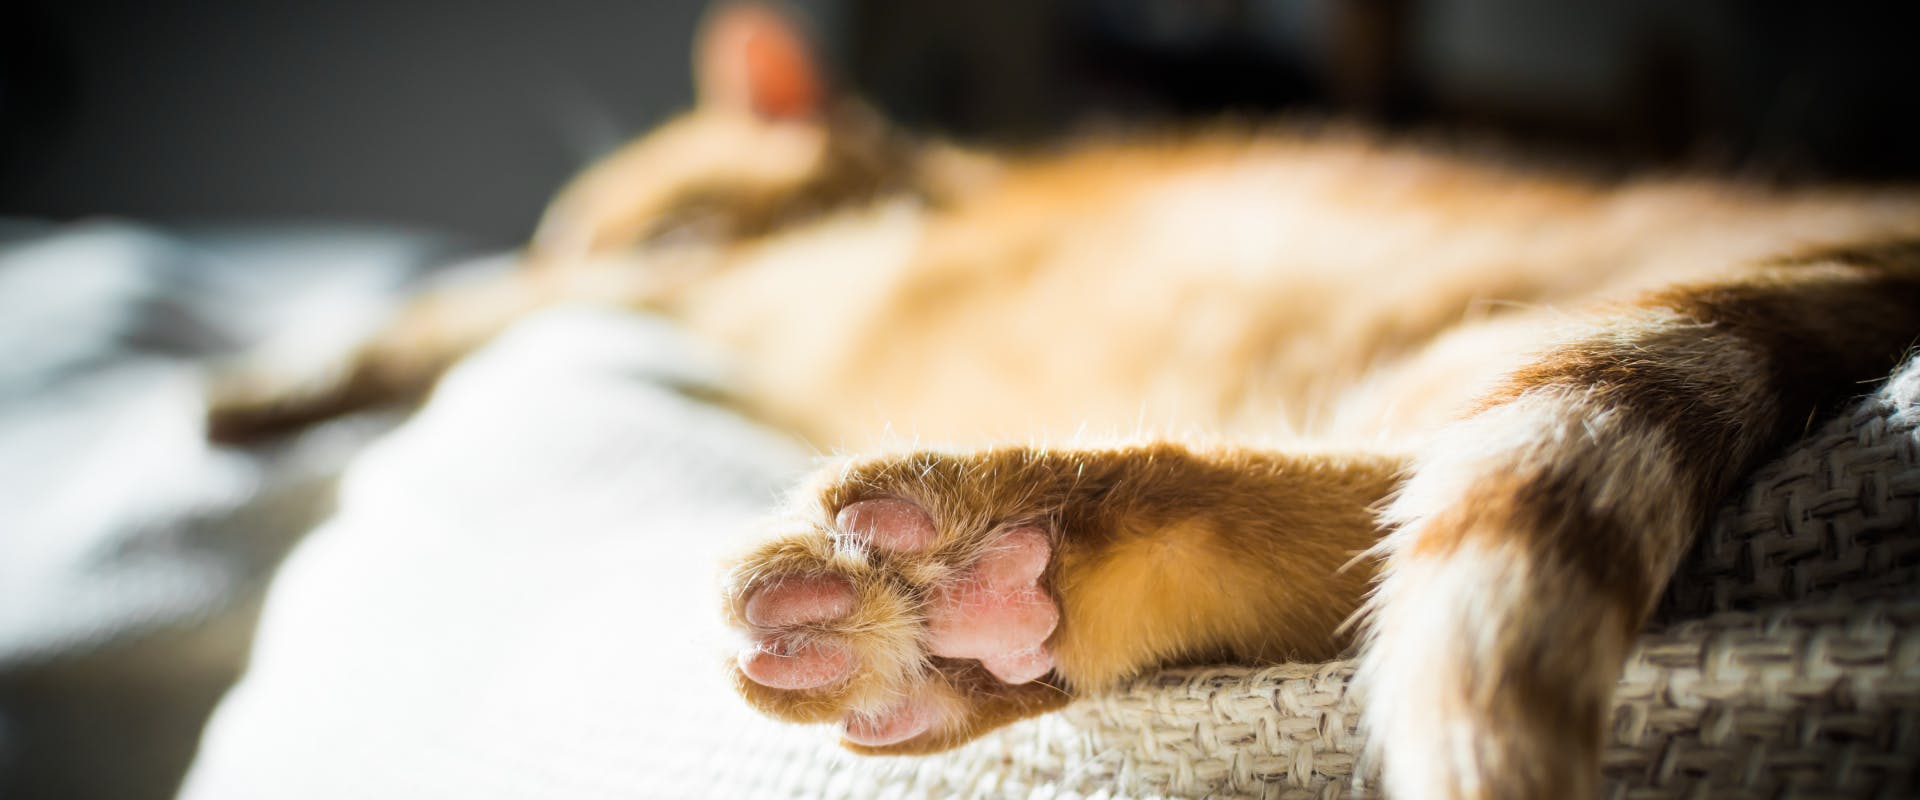 a sleeping tabby cat lying on a blanket in the sun with the camera focus on one of its back paws and toe beans